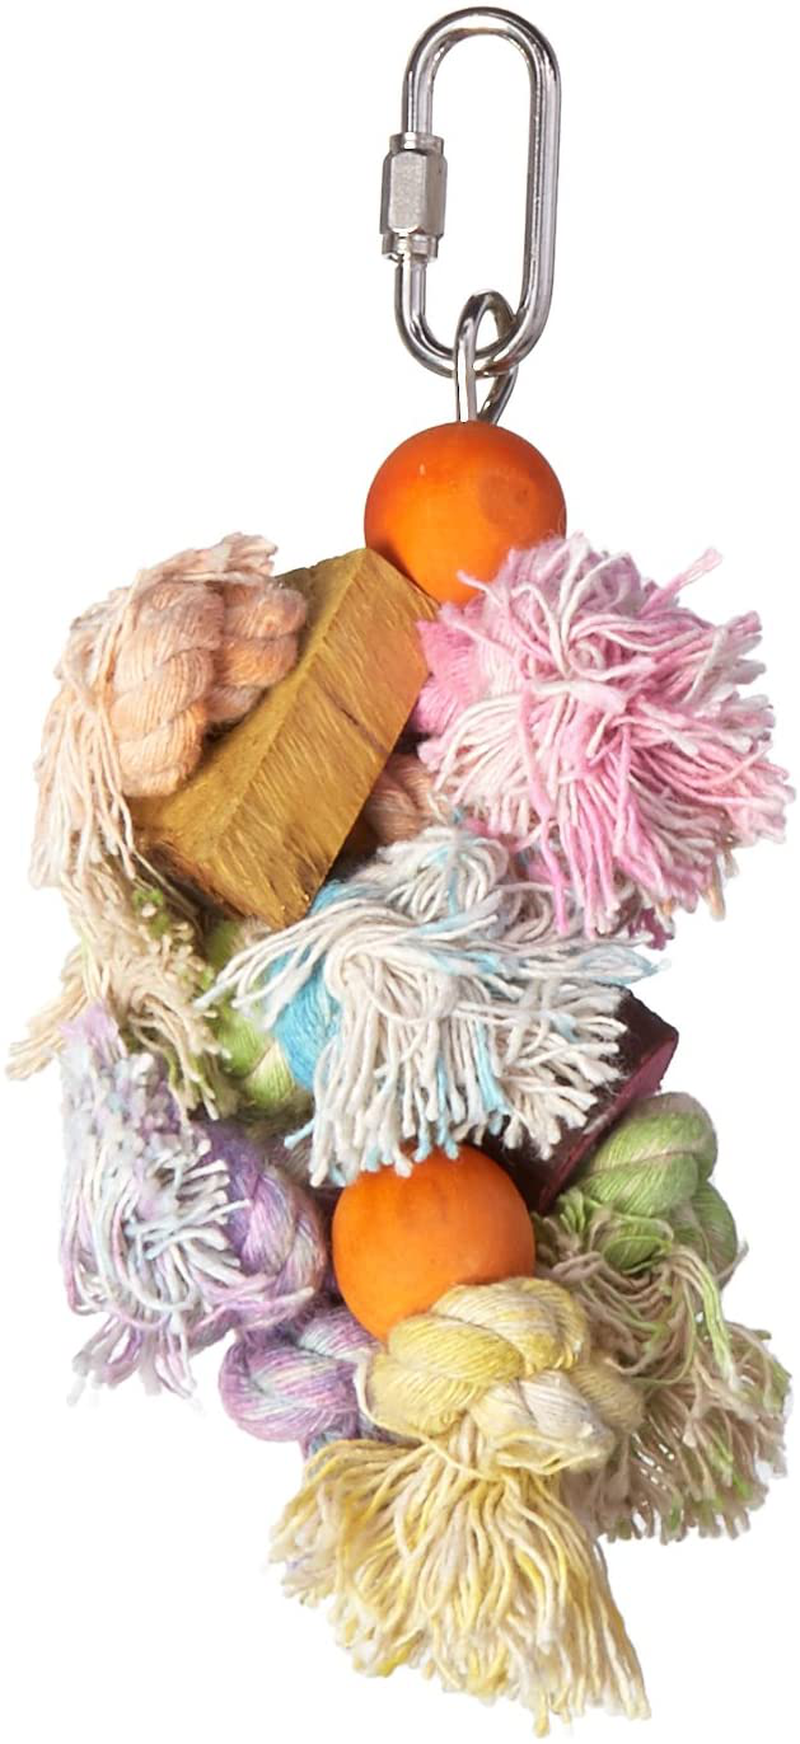 Penn-Plax Shaggy Kabob Bird Toy, 4 Size Options | Fun and Engaging Toy for Birds